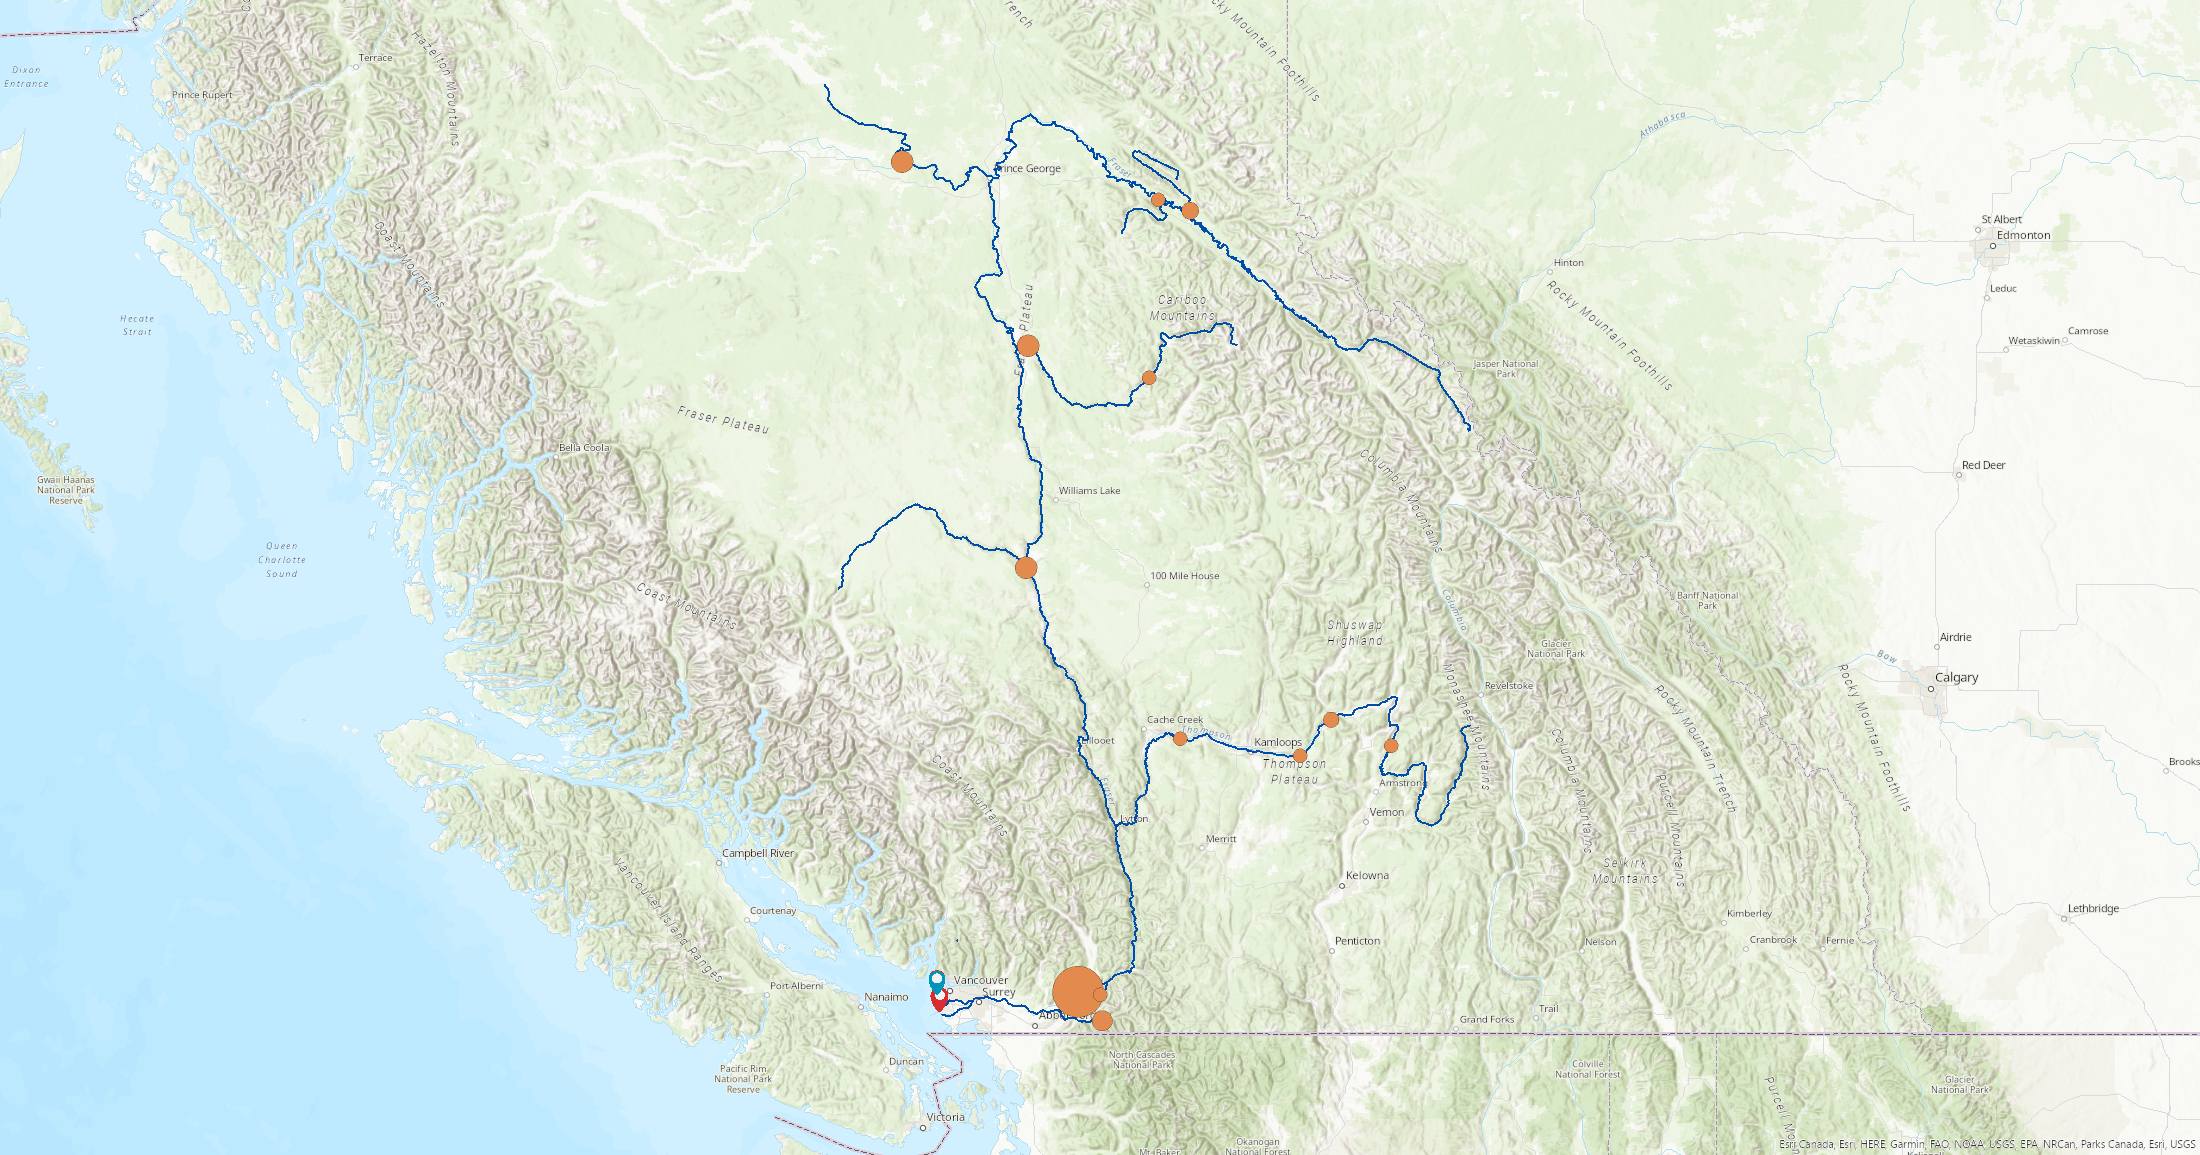 Map of BC displaying the Fraser River and tributaries as blue lines, the number of salmon that came from each river as orange circles, and the locations of jetty breaches as blue and red pins.